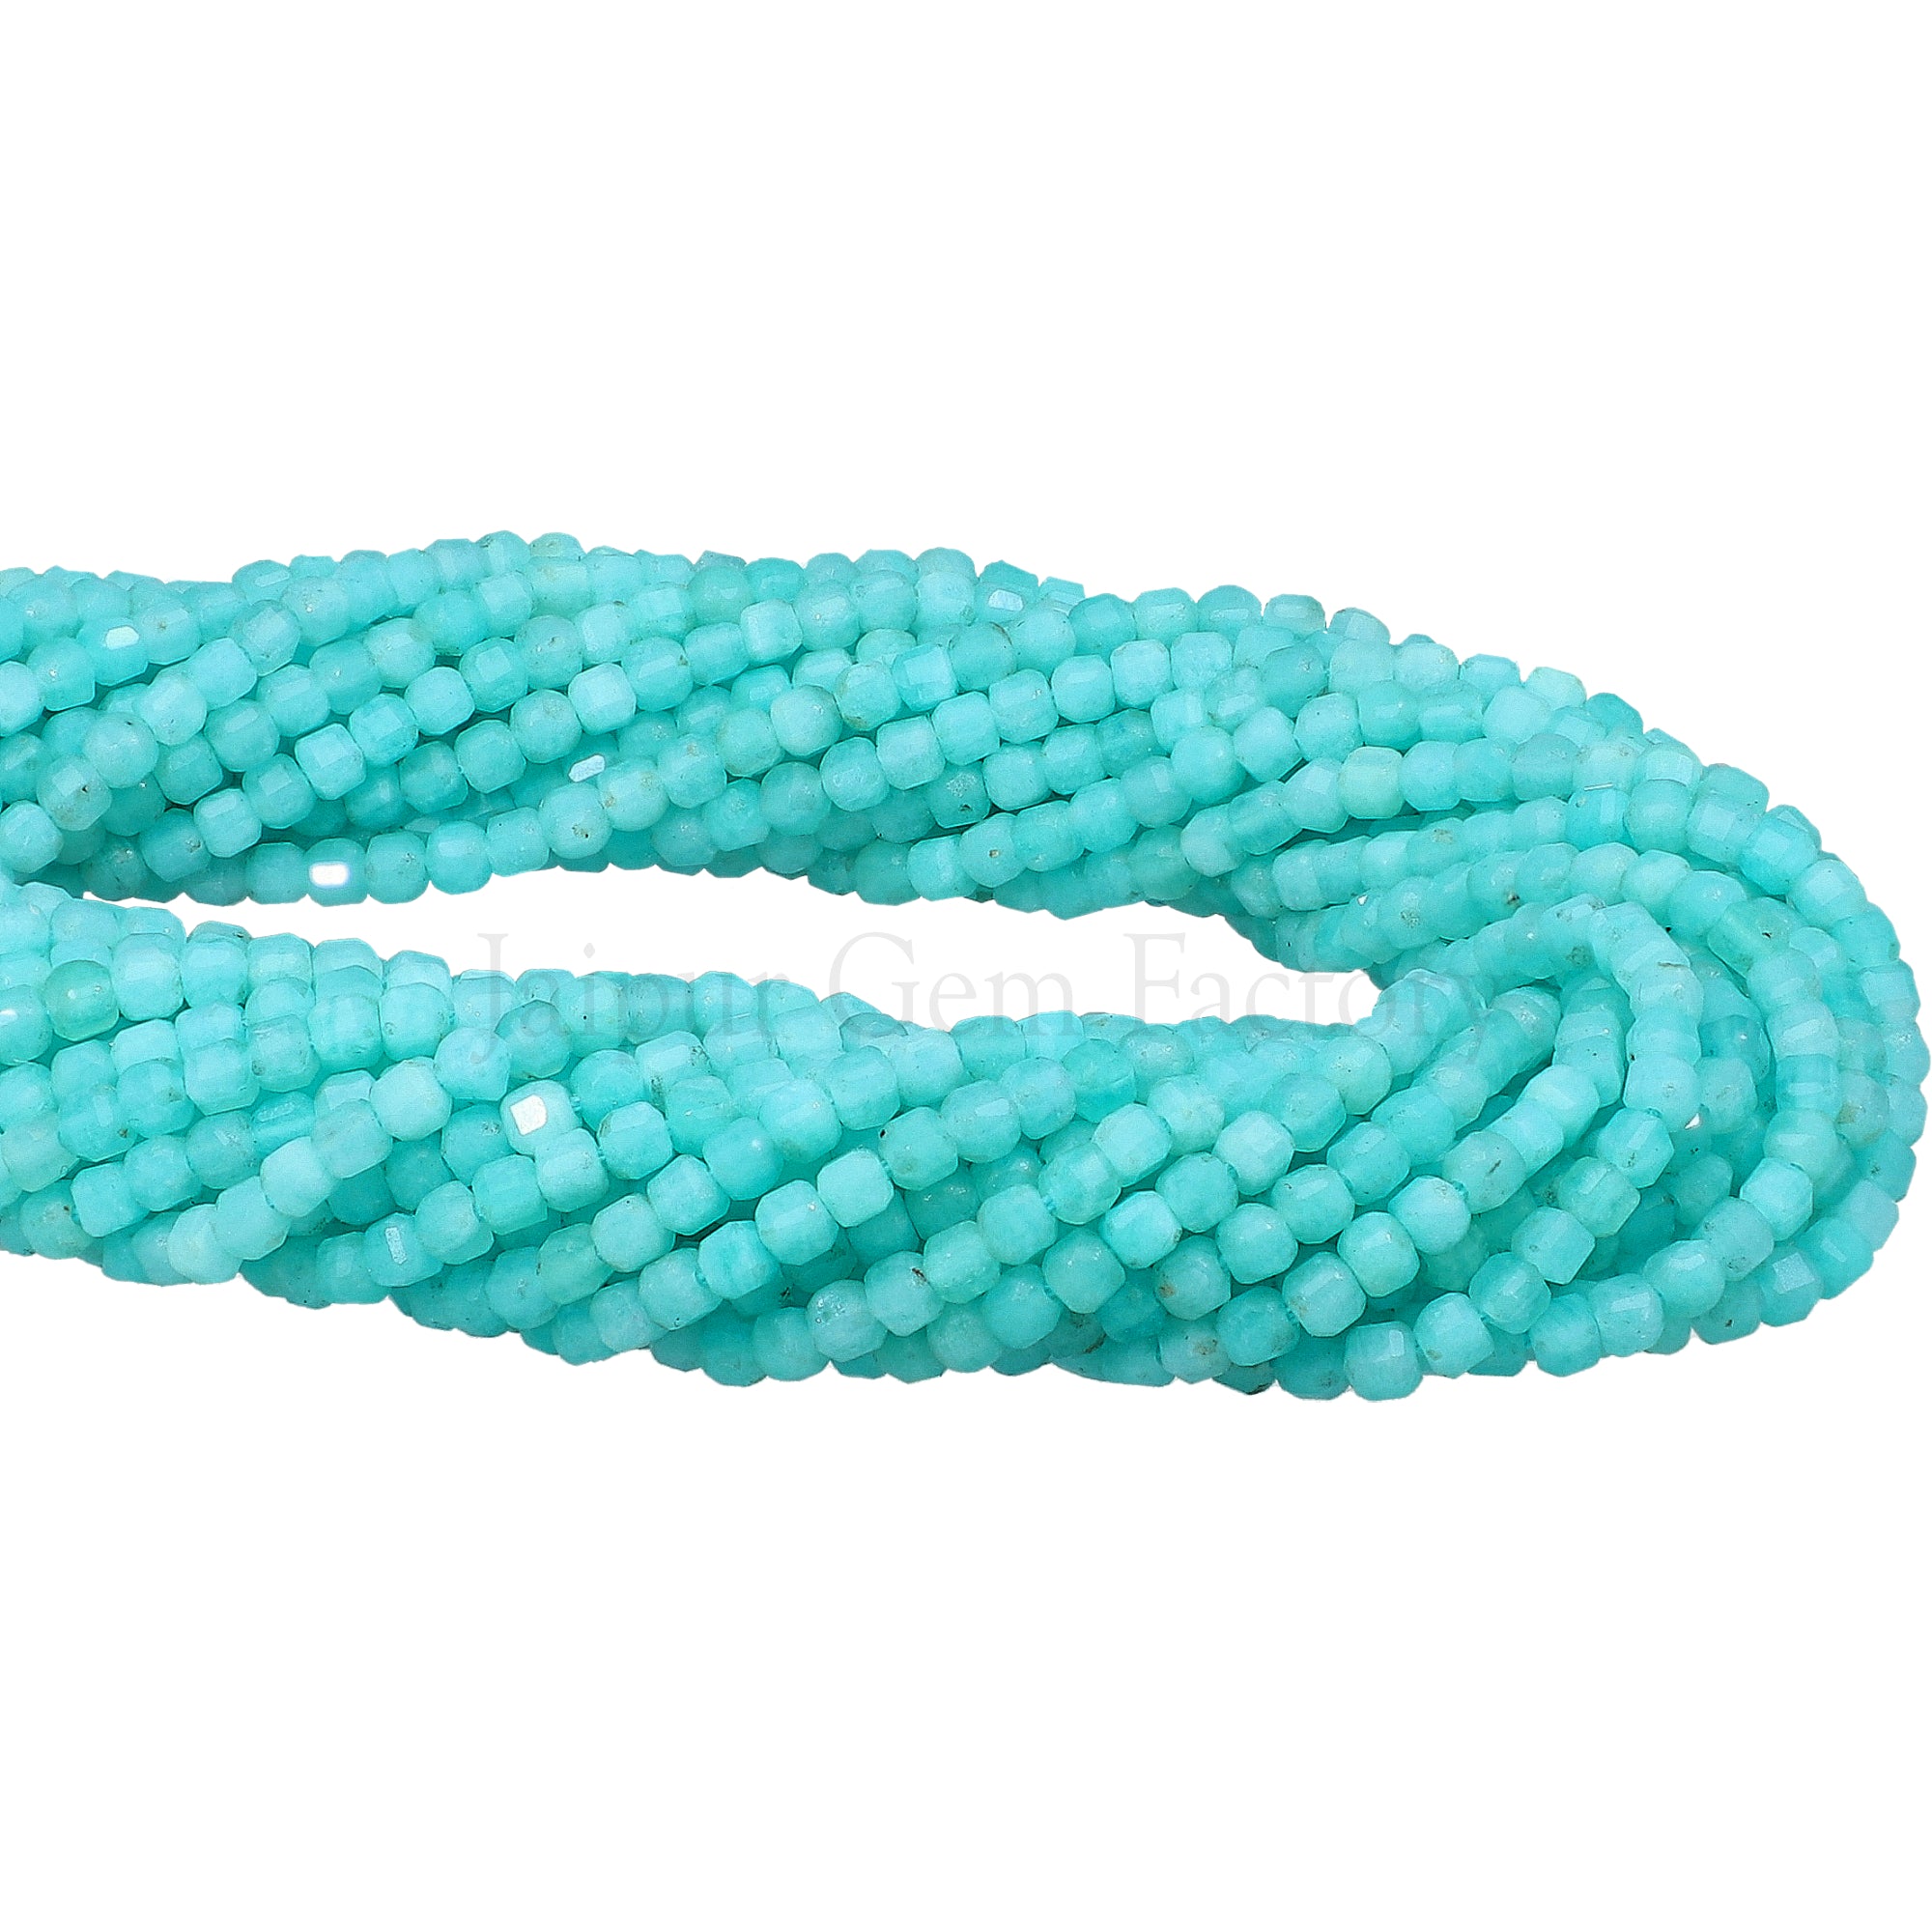 2.5 MM Amazonite Faceted Box Beads